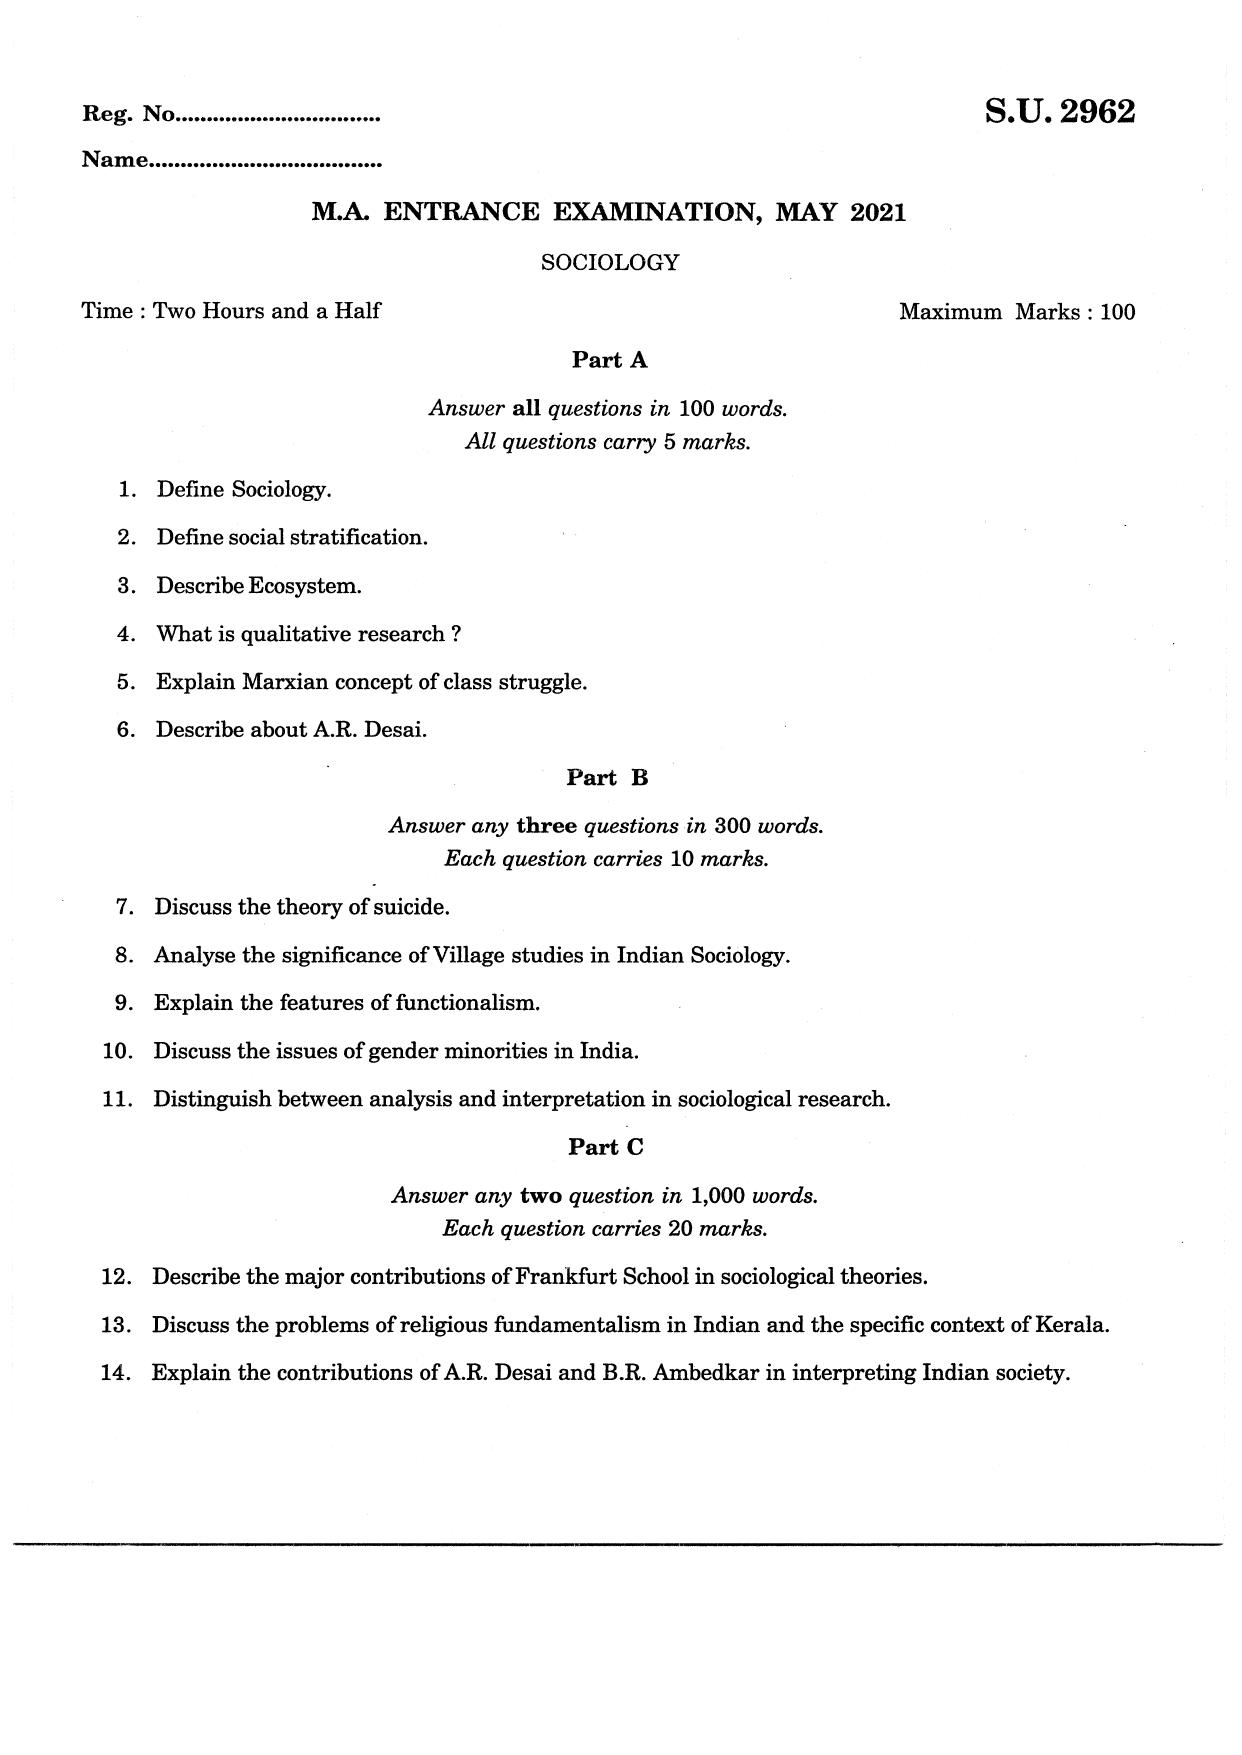 SSUS Entrance Exam Sociology 2021 Question Paper - Page 1